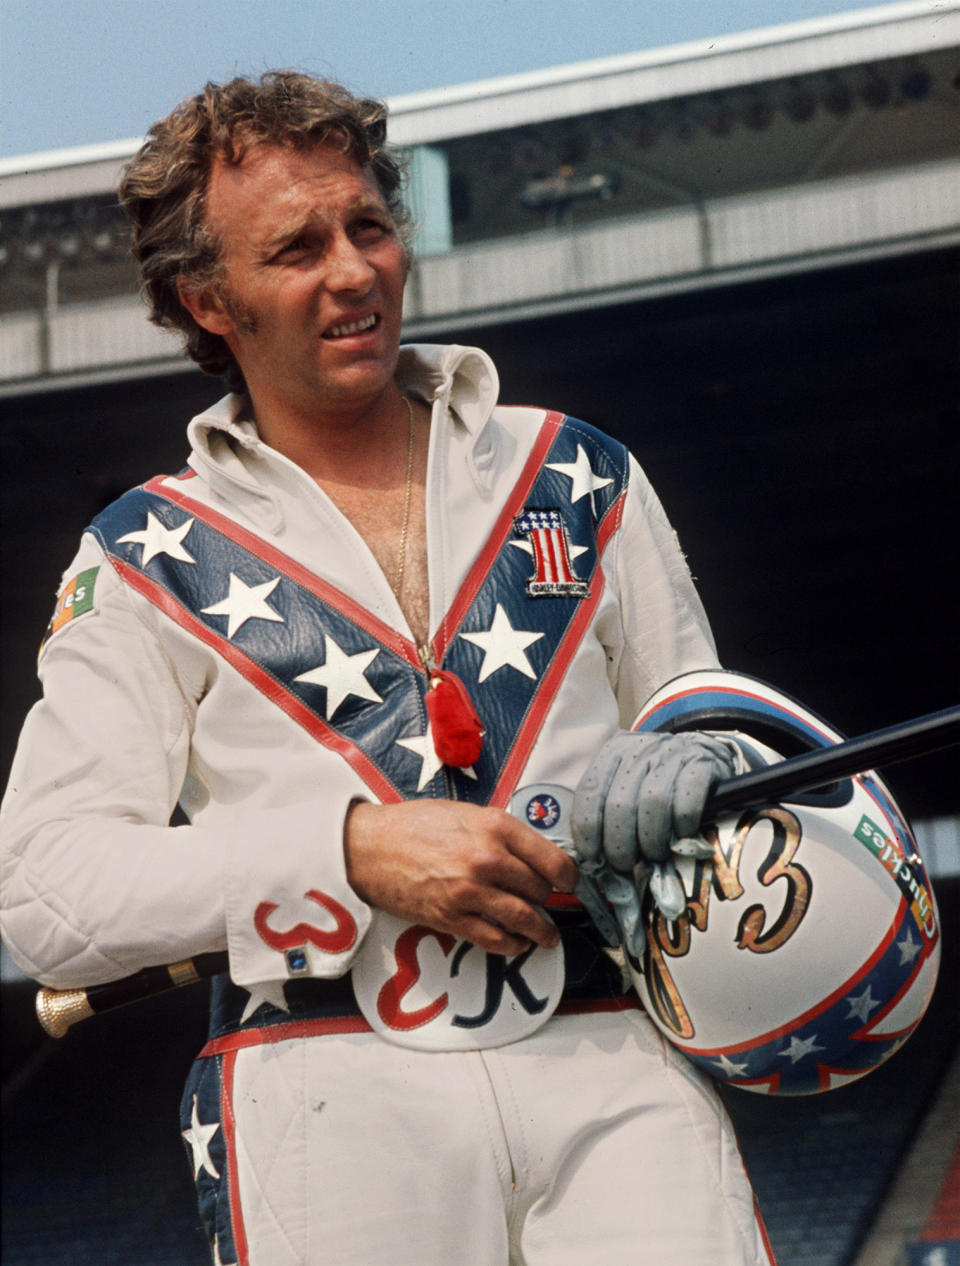 FILE - In this Aug. 20, 1974 file photo Daredevil motorcyclist Evel Knievel poses at the open-air Canadian national exhibition stadium in Toronto. A judge has dismissed a trademark infringement lawsuit filed by Evel Knievel’s son against the Walt Disney Co. and movie company Pixar over a “Toy Story 4” daredevil character named Duke Caboom. Kelly Knievel said Monday, Sept. 27, 2021, he's disappointed and may take the case to the 9th Circuit Court of Appeals in San Francisco. (AP Photo/Chris O'Meara, File)